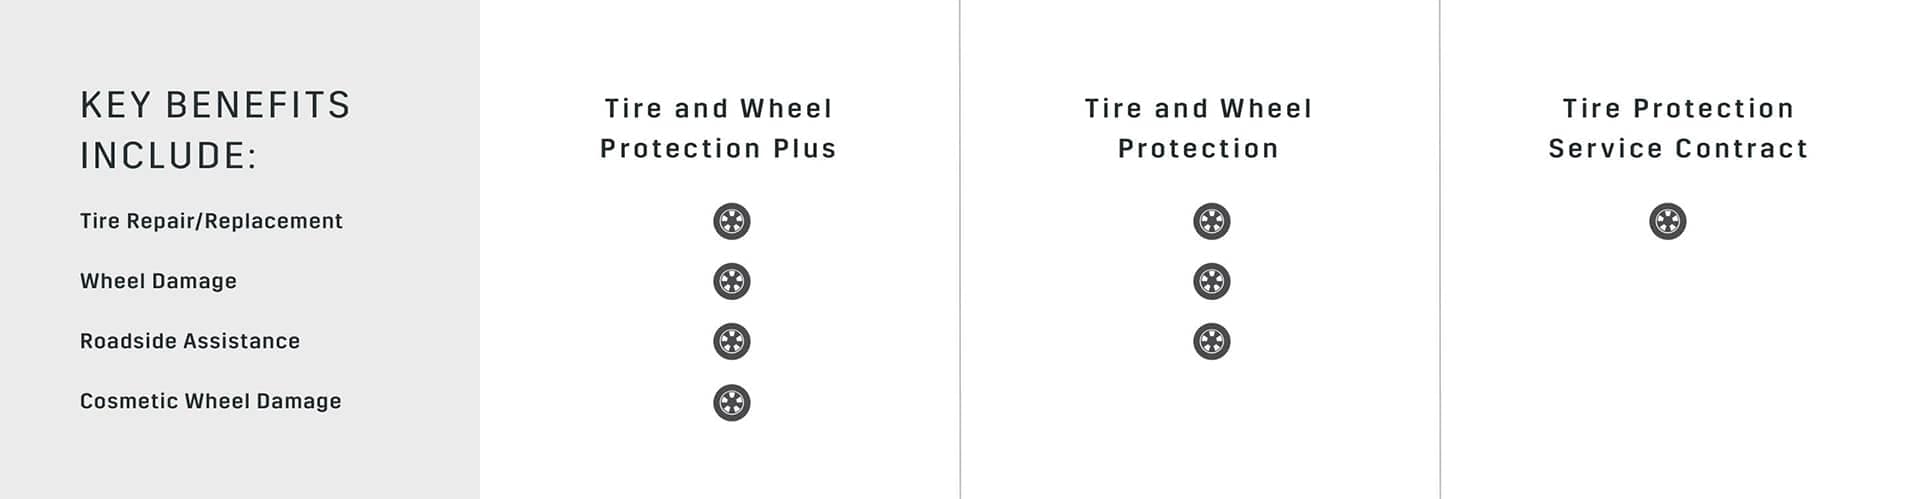 Cadillac Protection Tire and Wheel Key Benefit Comparison Chart